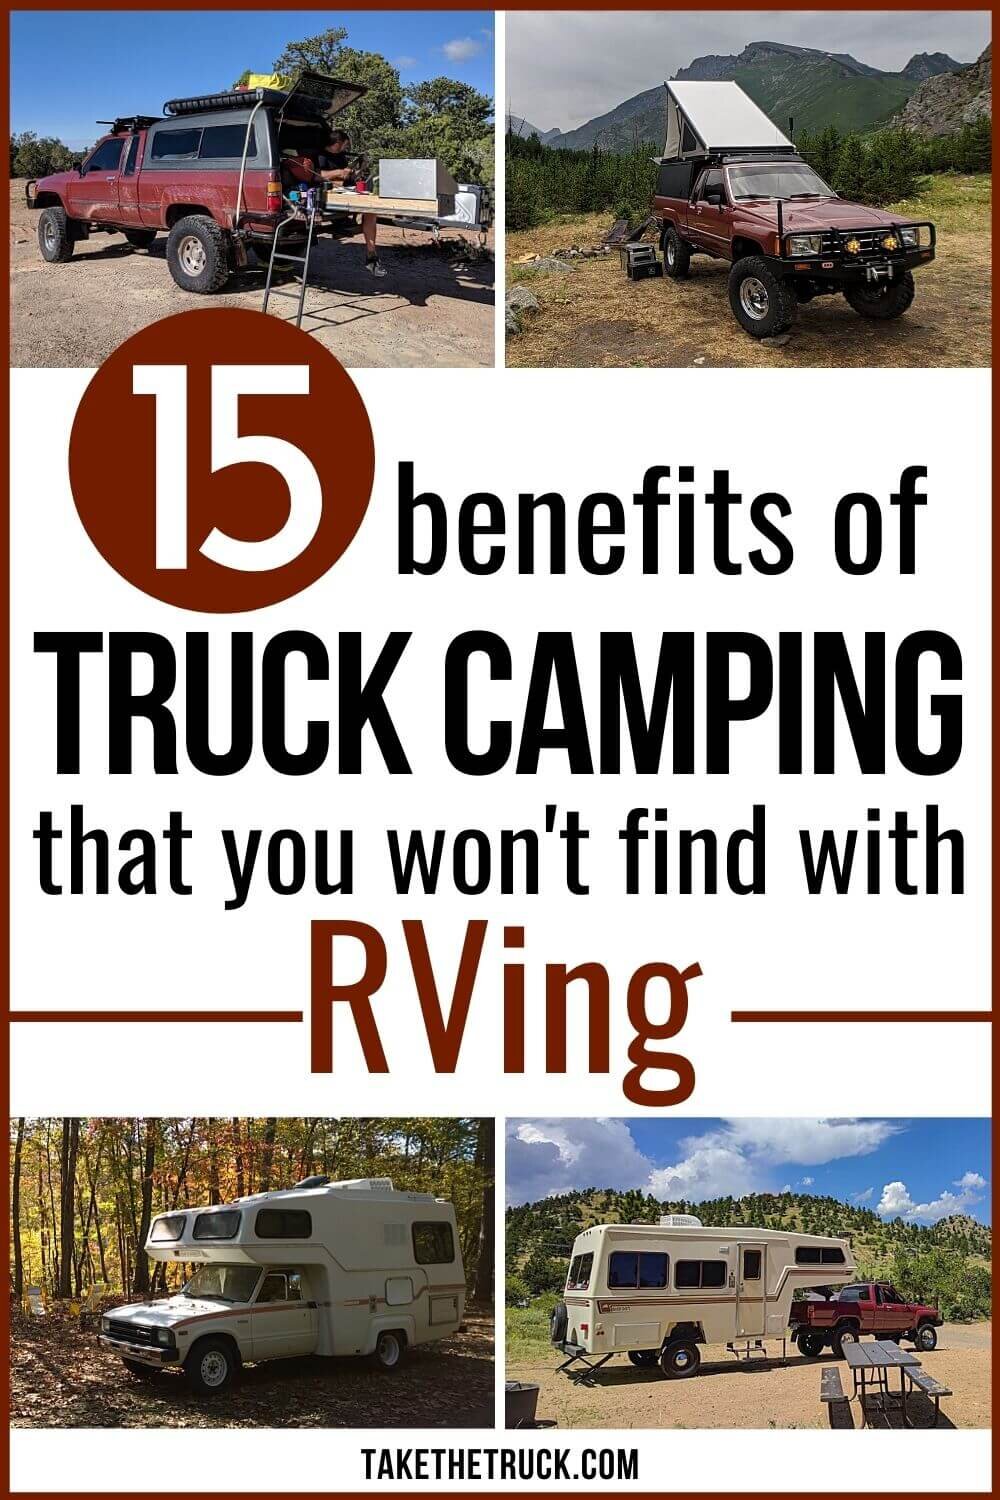 Trying to figure out RV vs camper? Here’s a list of 15 reasons truck shell camping and truck camper traveling win out over RV travel. It'll help with the decision of truck bed camper vs rv.